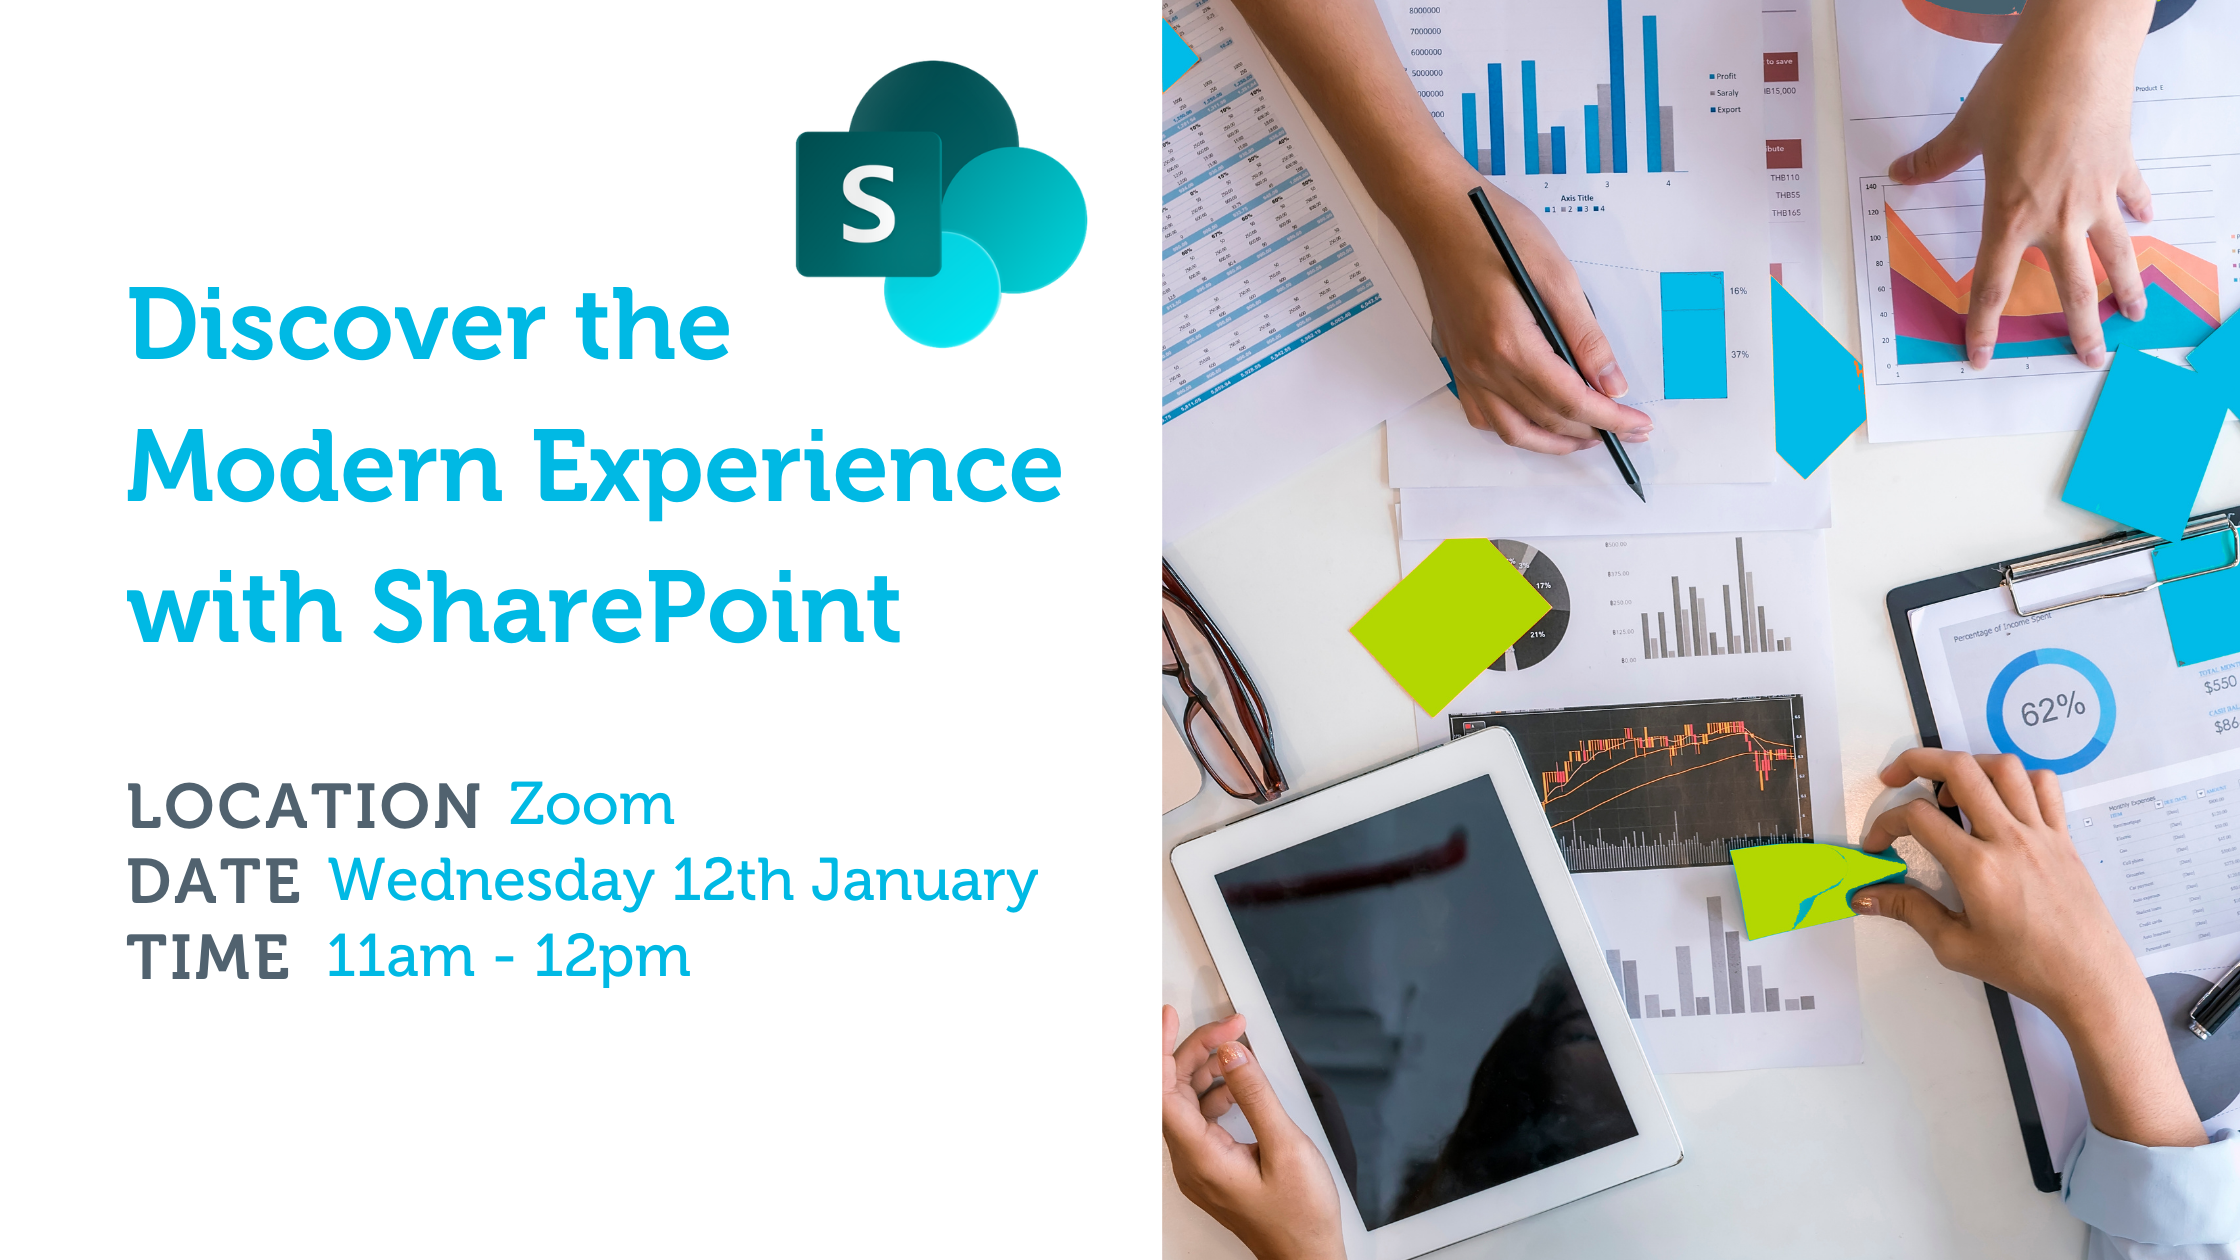 Discover the modern experience with SharePoint